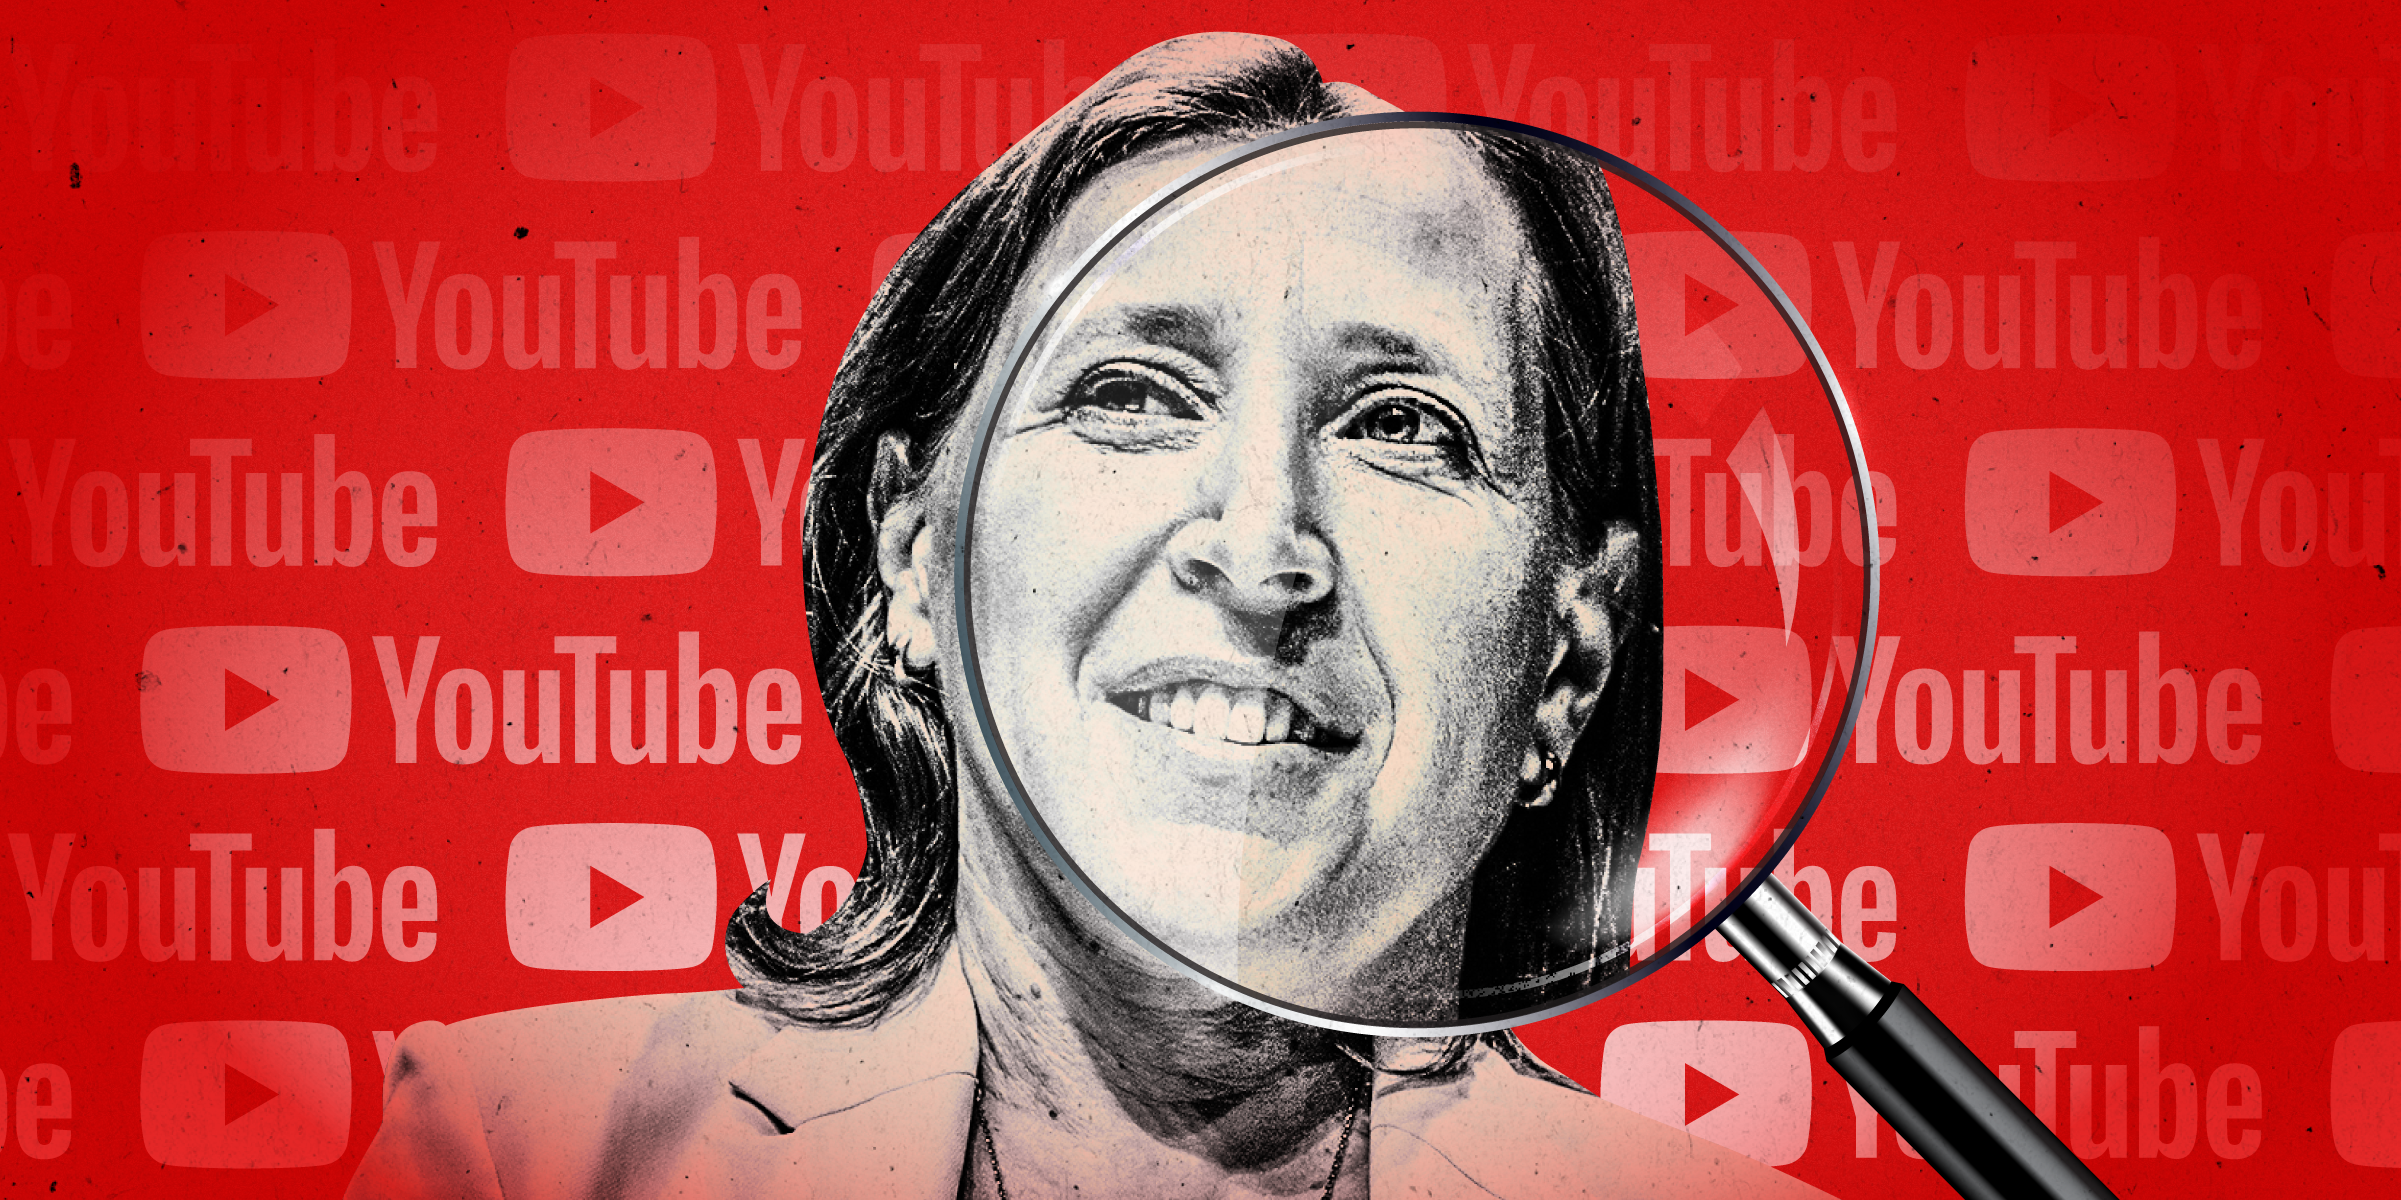 Susan Wojcicki with a magnifying glass over her face. The YouTube logo is patterned out behind her on a red background.